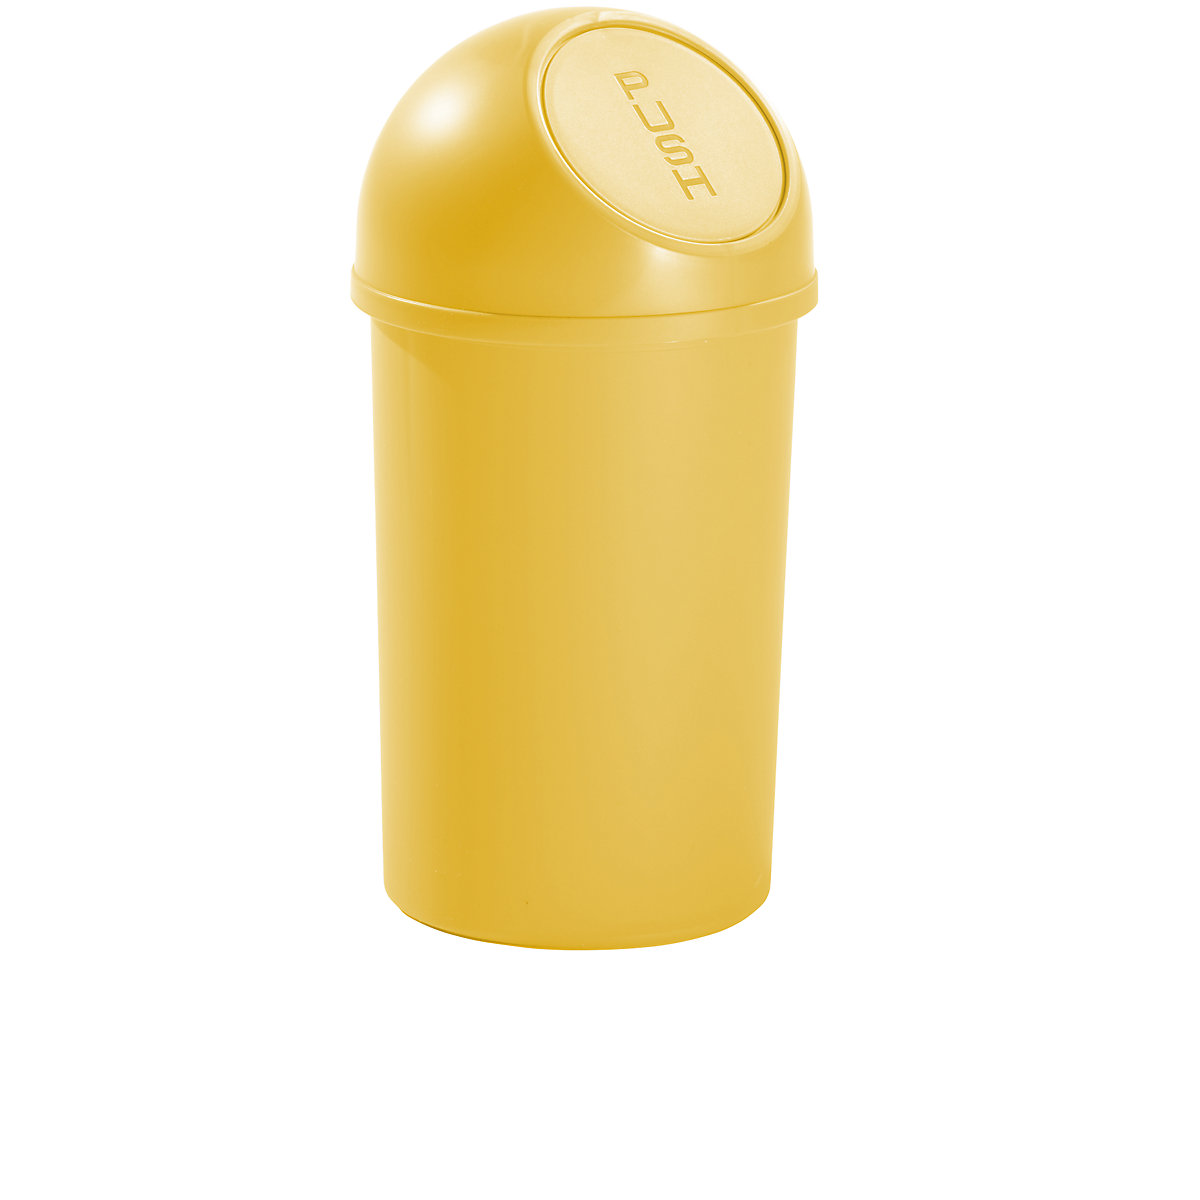 Push top waste bin made of plastic – helit, capacity 13 l, pack of 6, HxØ 490 x 252 mm, yellow-5